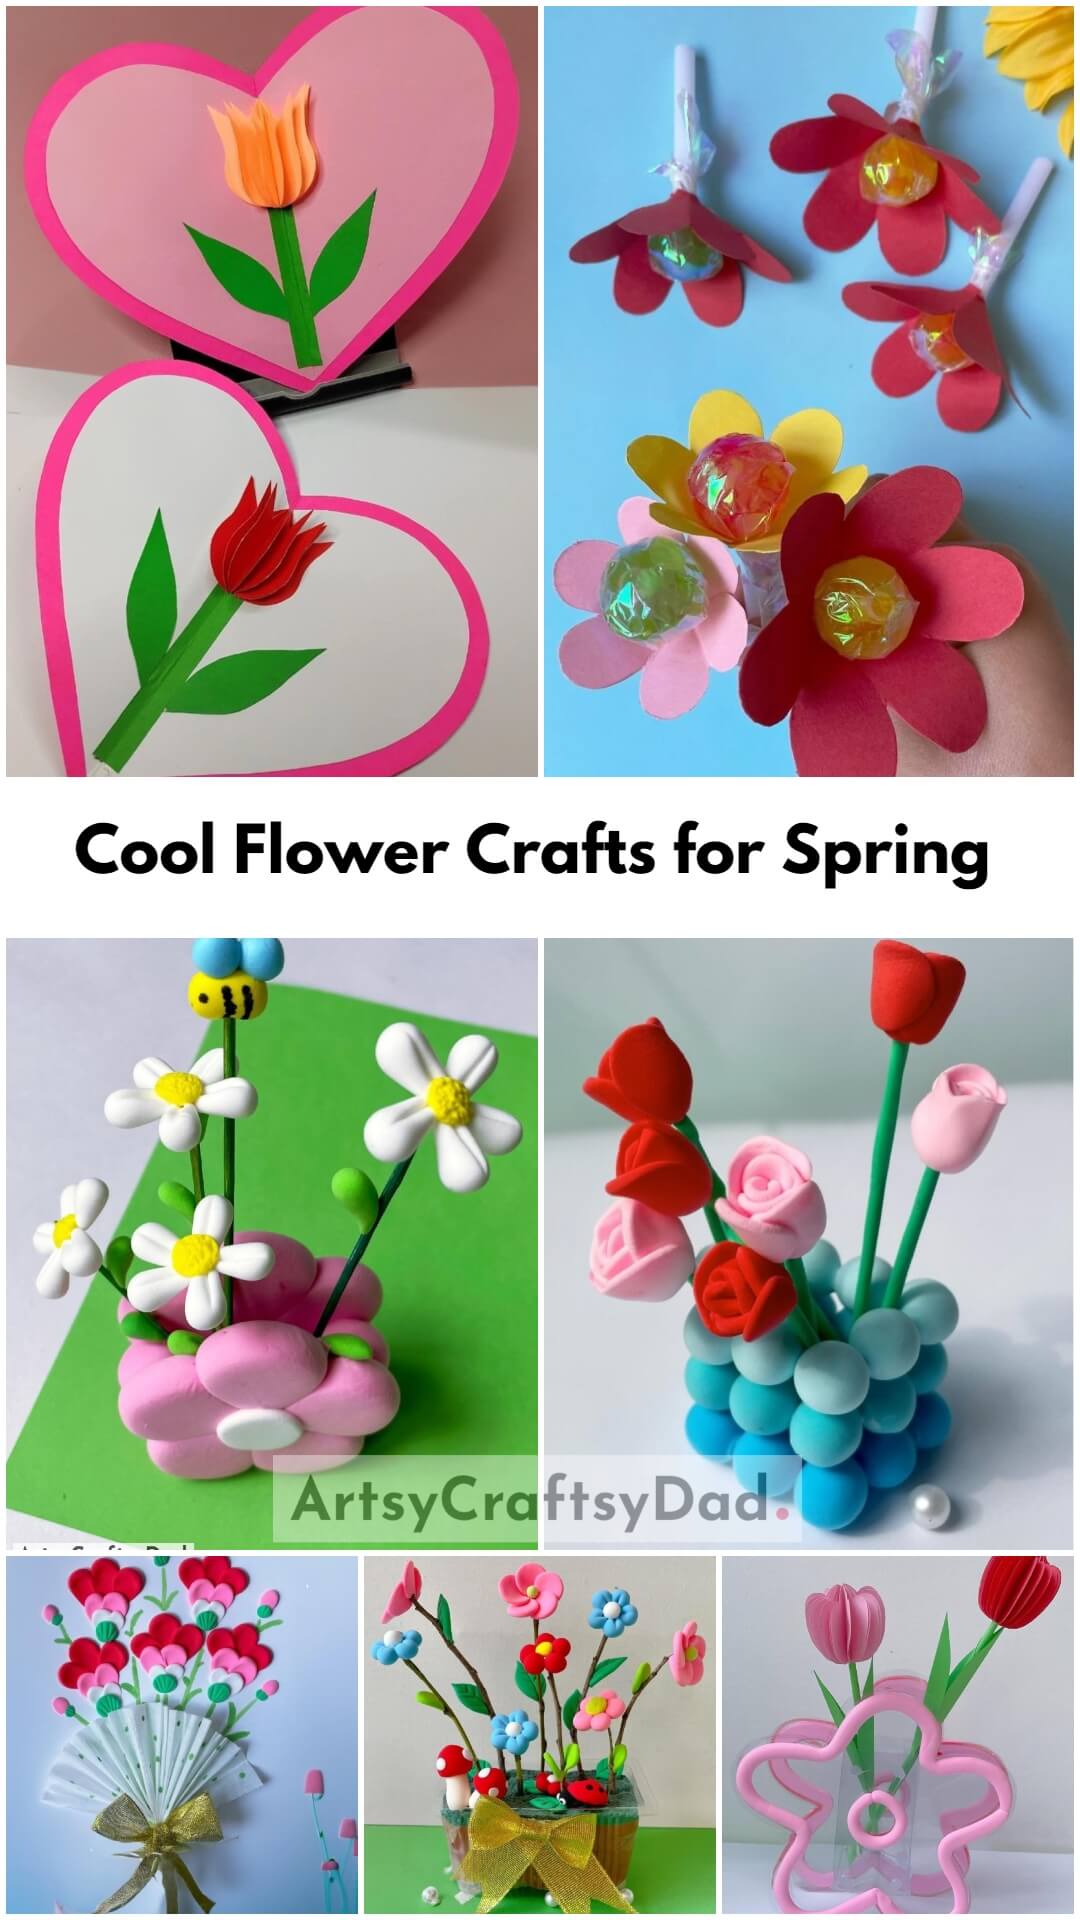  Cool Flower Crafts for Spring Projects